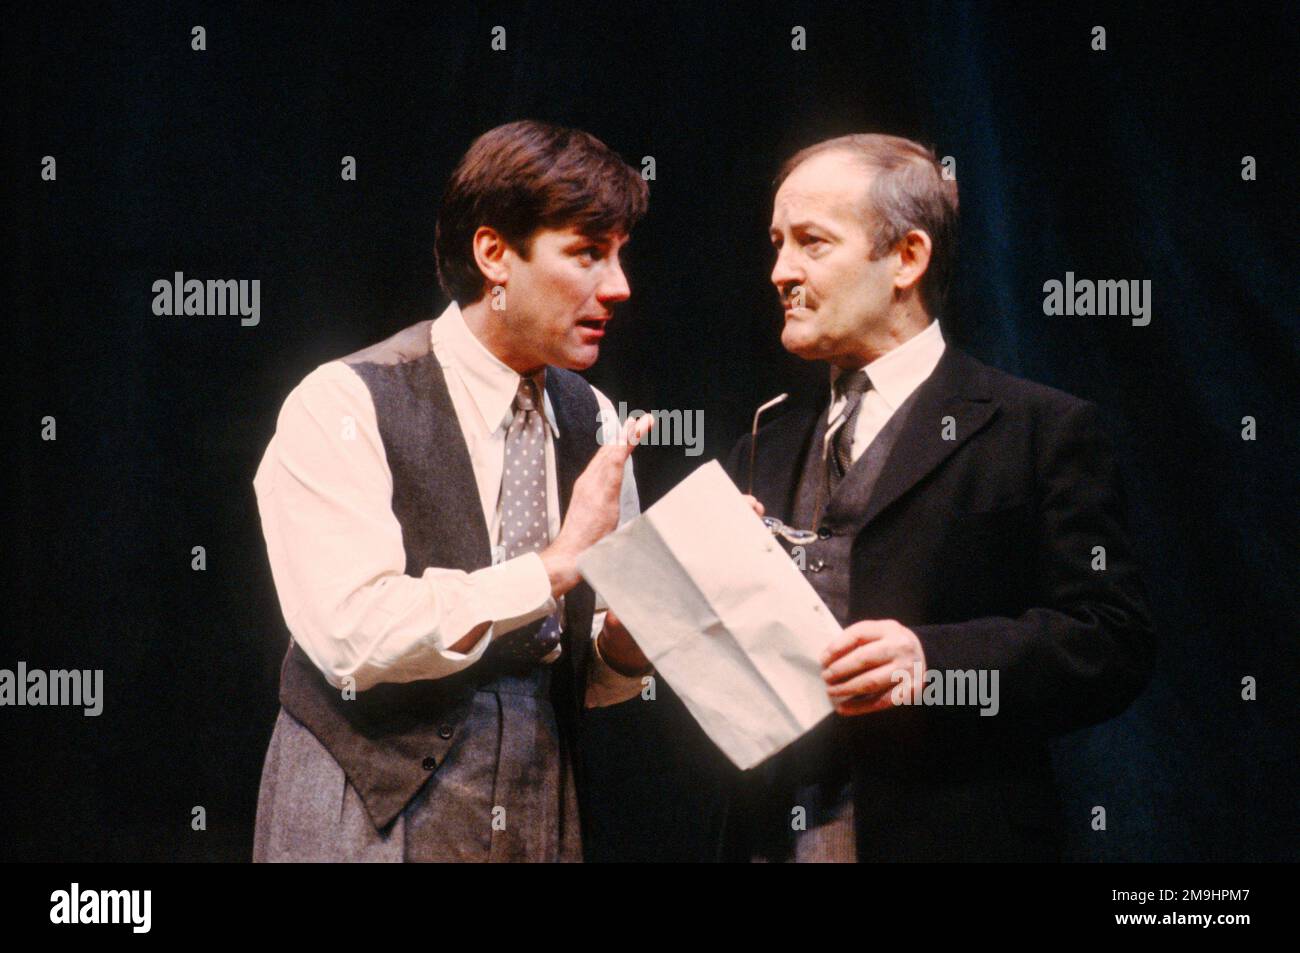 l-r: John Duttine (The Actor), Charles Kay (Arthur Kipps) in THE WOMAN IN BLACK by Stephen Mallatratt at the Lyric Hammersmith, London W6  11/01/1989adapted from the novel by Susan Hill  a 1987 Stephen Joseph Theatre Scarborough original stage production Stock Photo